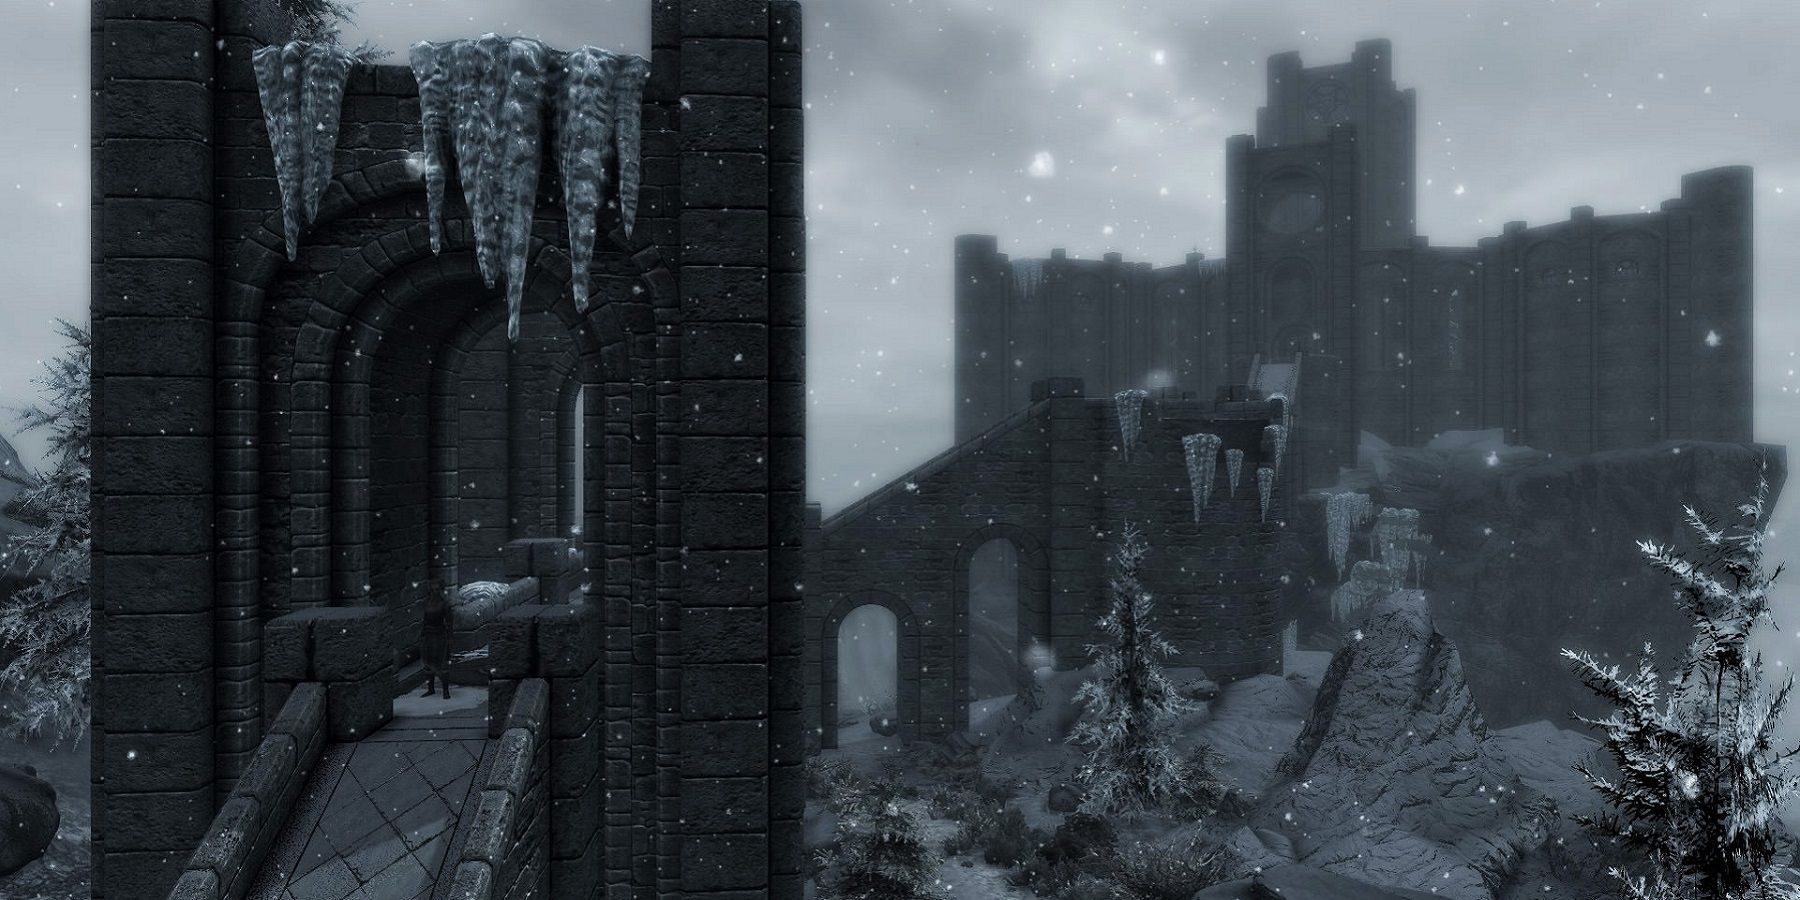 Image from Skyrim showing the walk up to the College of Winterhold school of magic.